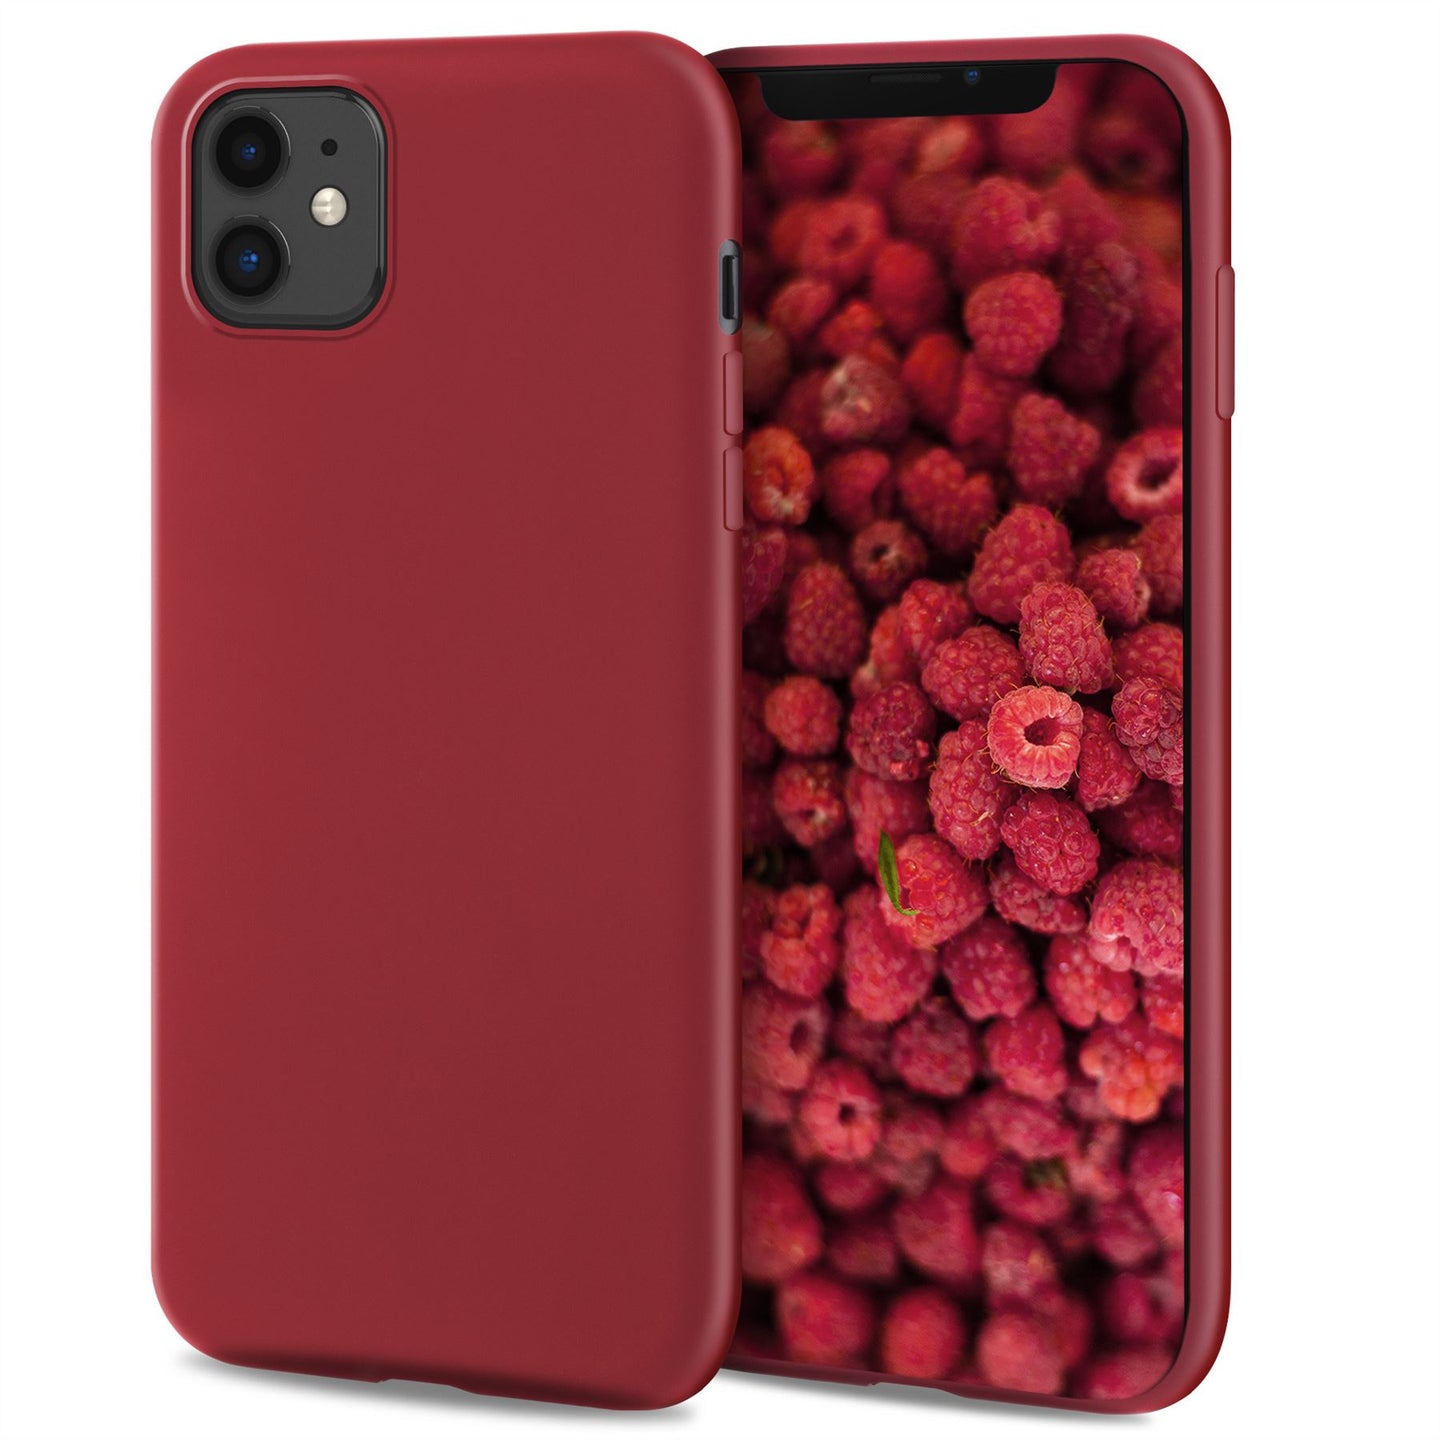 Moozy Lifestyle. Designed for iPhone 11 Case, Vintage Pink - Liquid Silicone Cover with Matte Finish and Soft Microfiber Lining